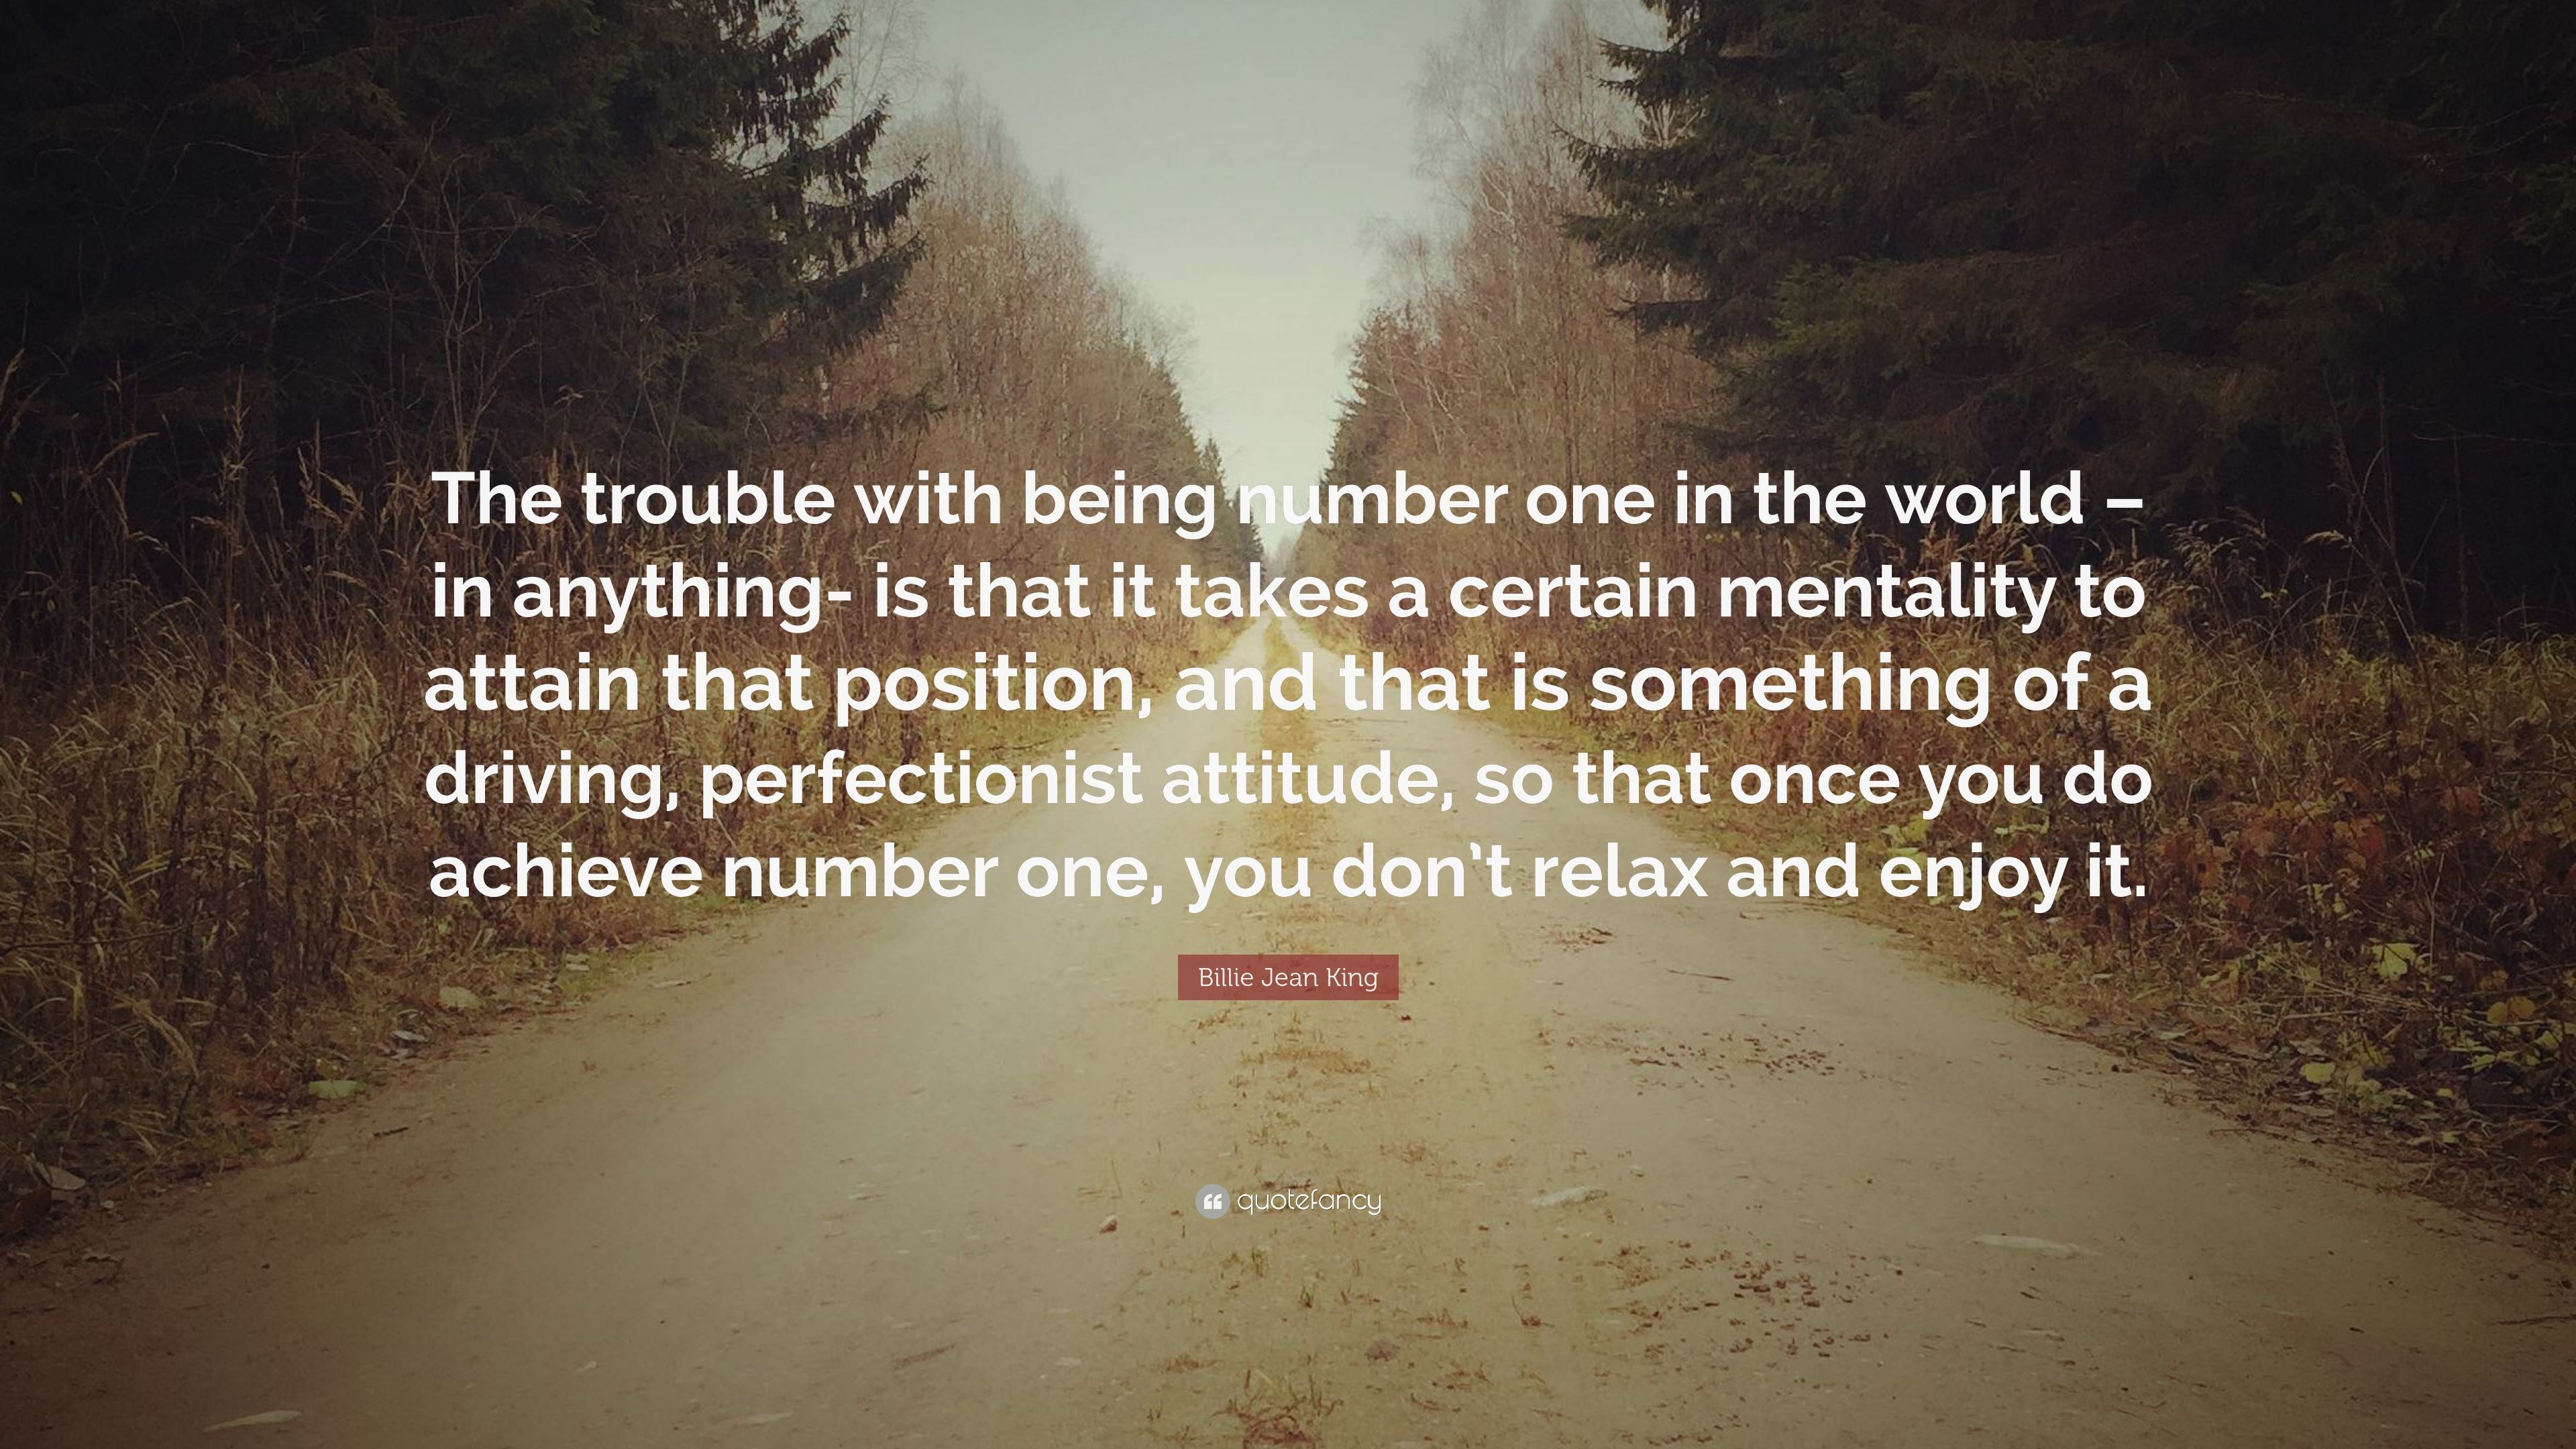 Billie Jean King Quote: “The trouble with being number one in